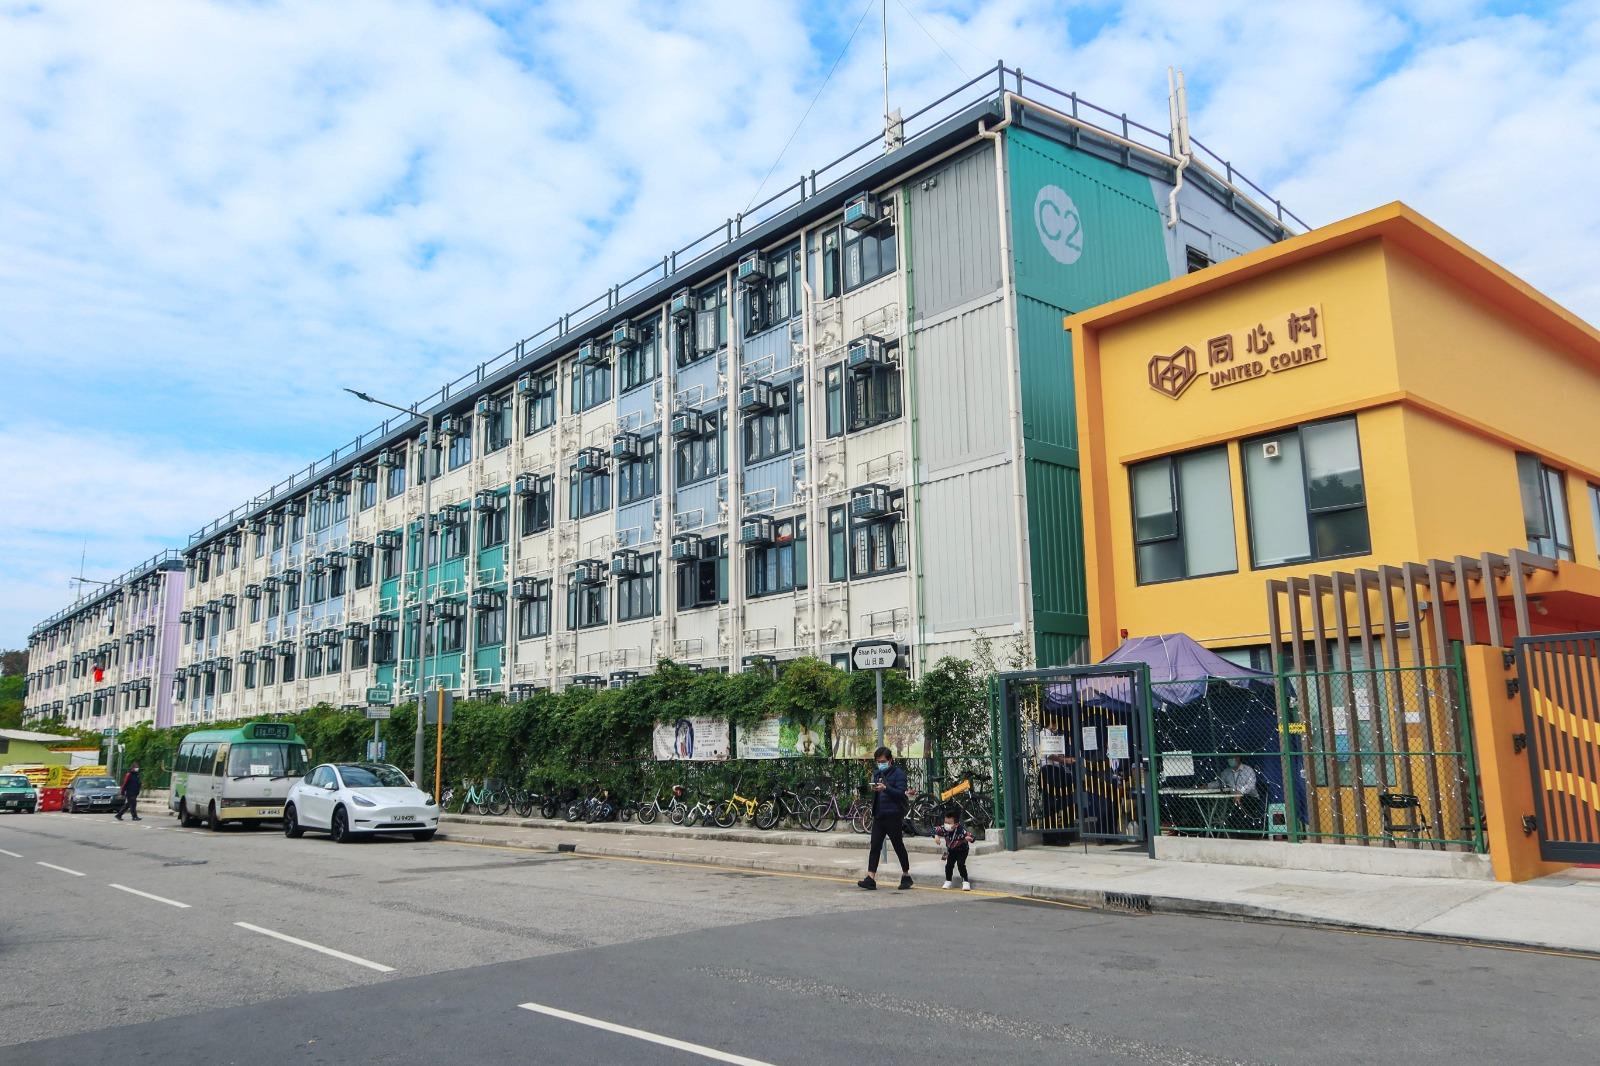 The Housing Bureau will organise a Transitional Housing Open Day on July 15 (Saturday) and provide shuttle bus services for interested parties to visit the transitional housing project at United Court at Tung Tau in Yuen Long. Photo shows the United Court.